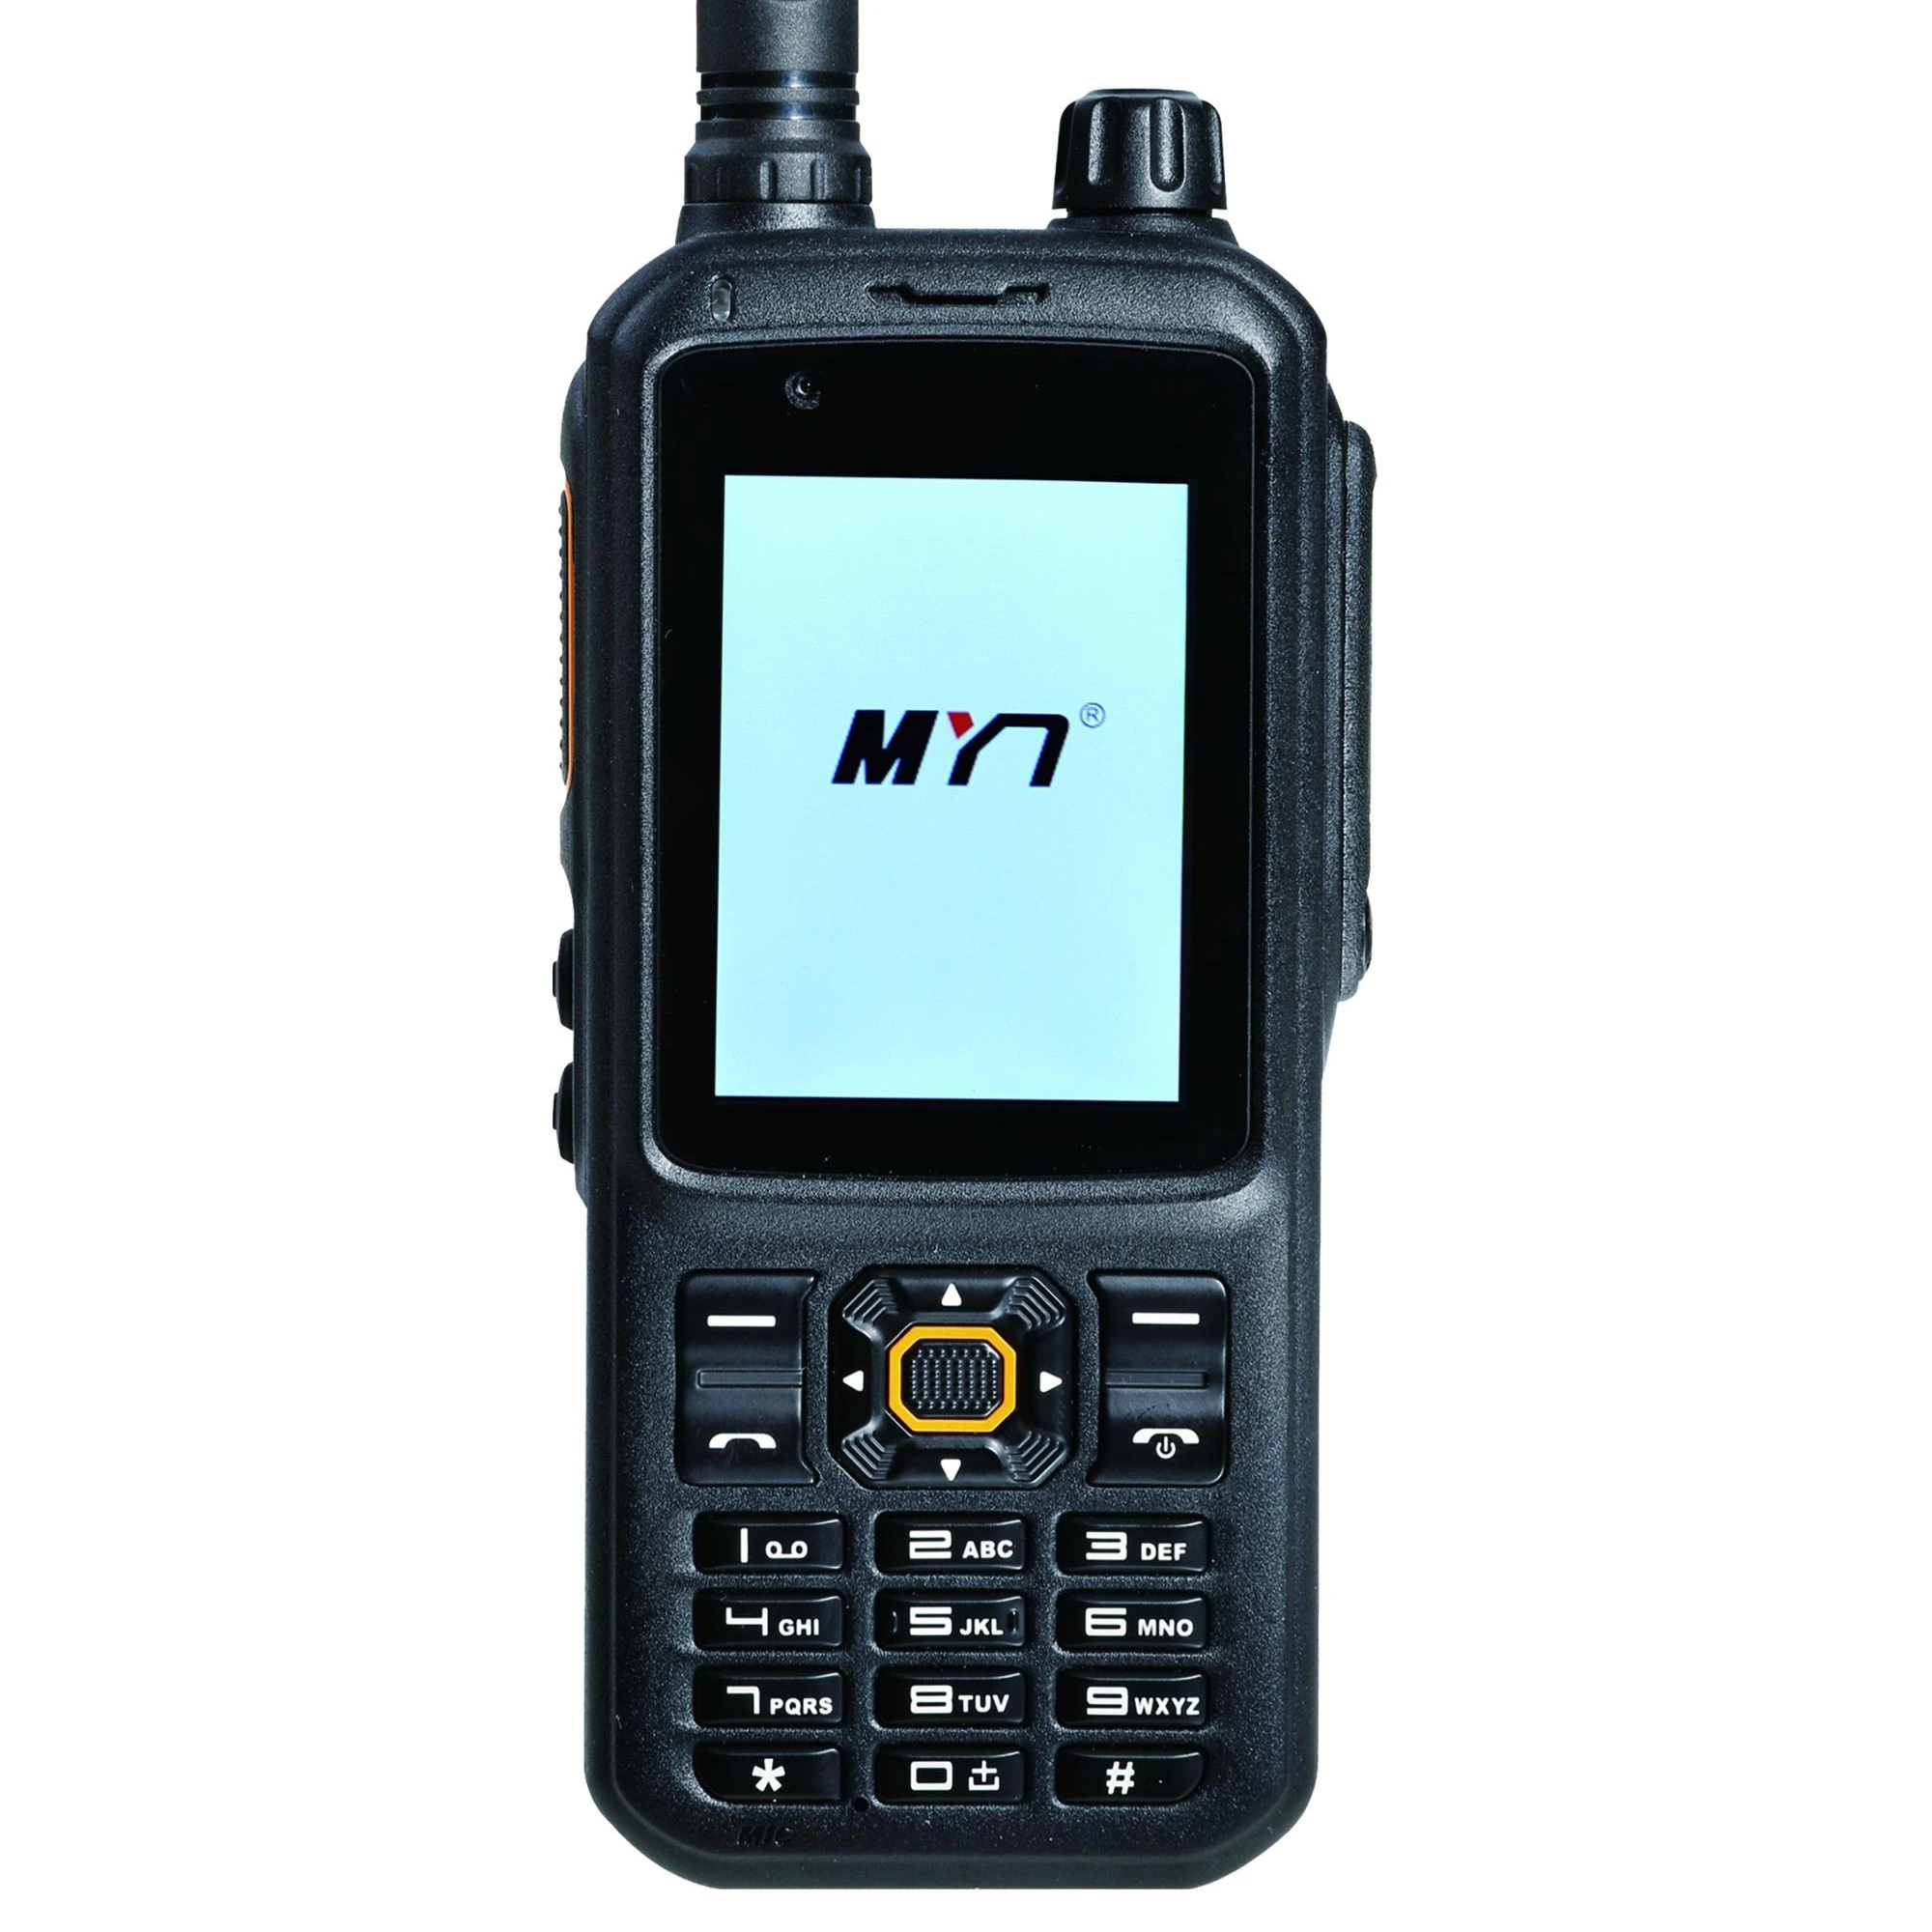 

MYT-V988 handheld Android 2.4 inch touch screen Walkie Talkie with sim card network WCDMA/GSM 3G 4G LTE, Black